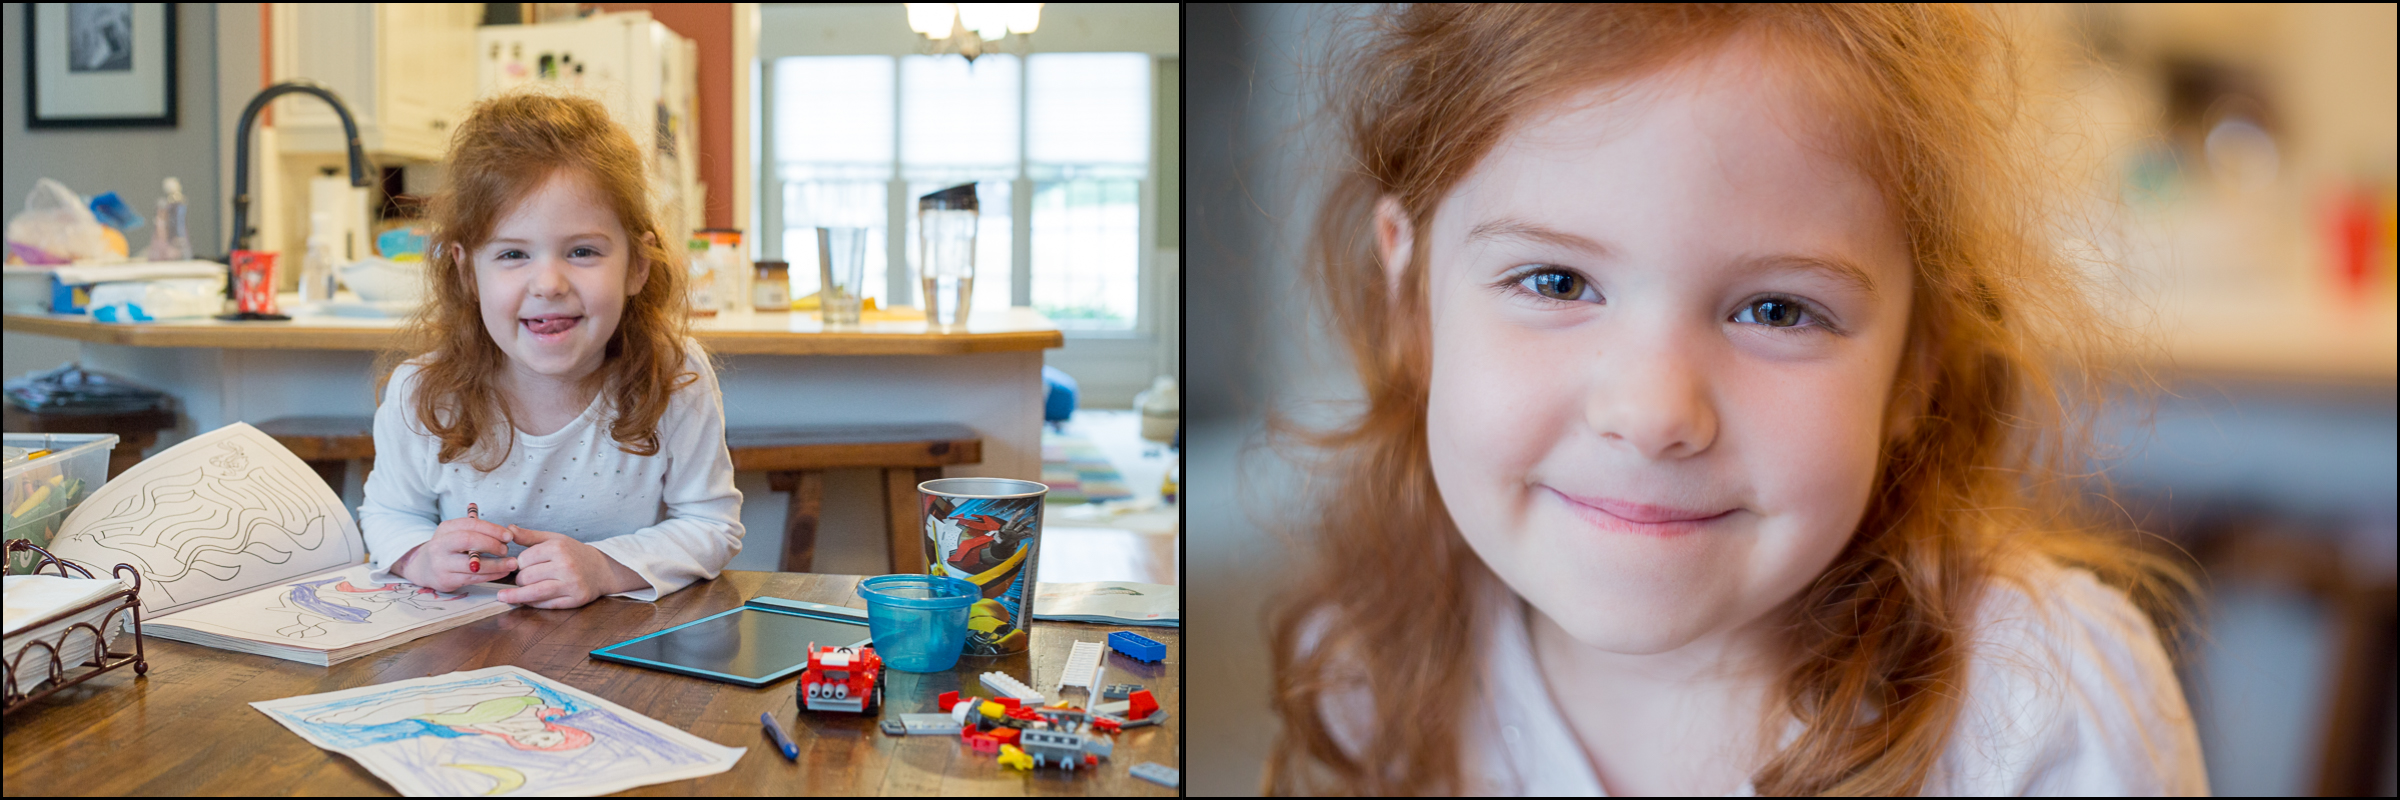 8 Tips to Take Better Pictures by Losing the Background Clutter 5